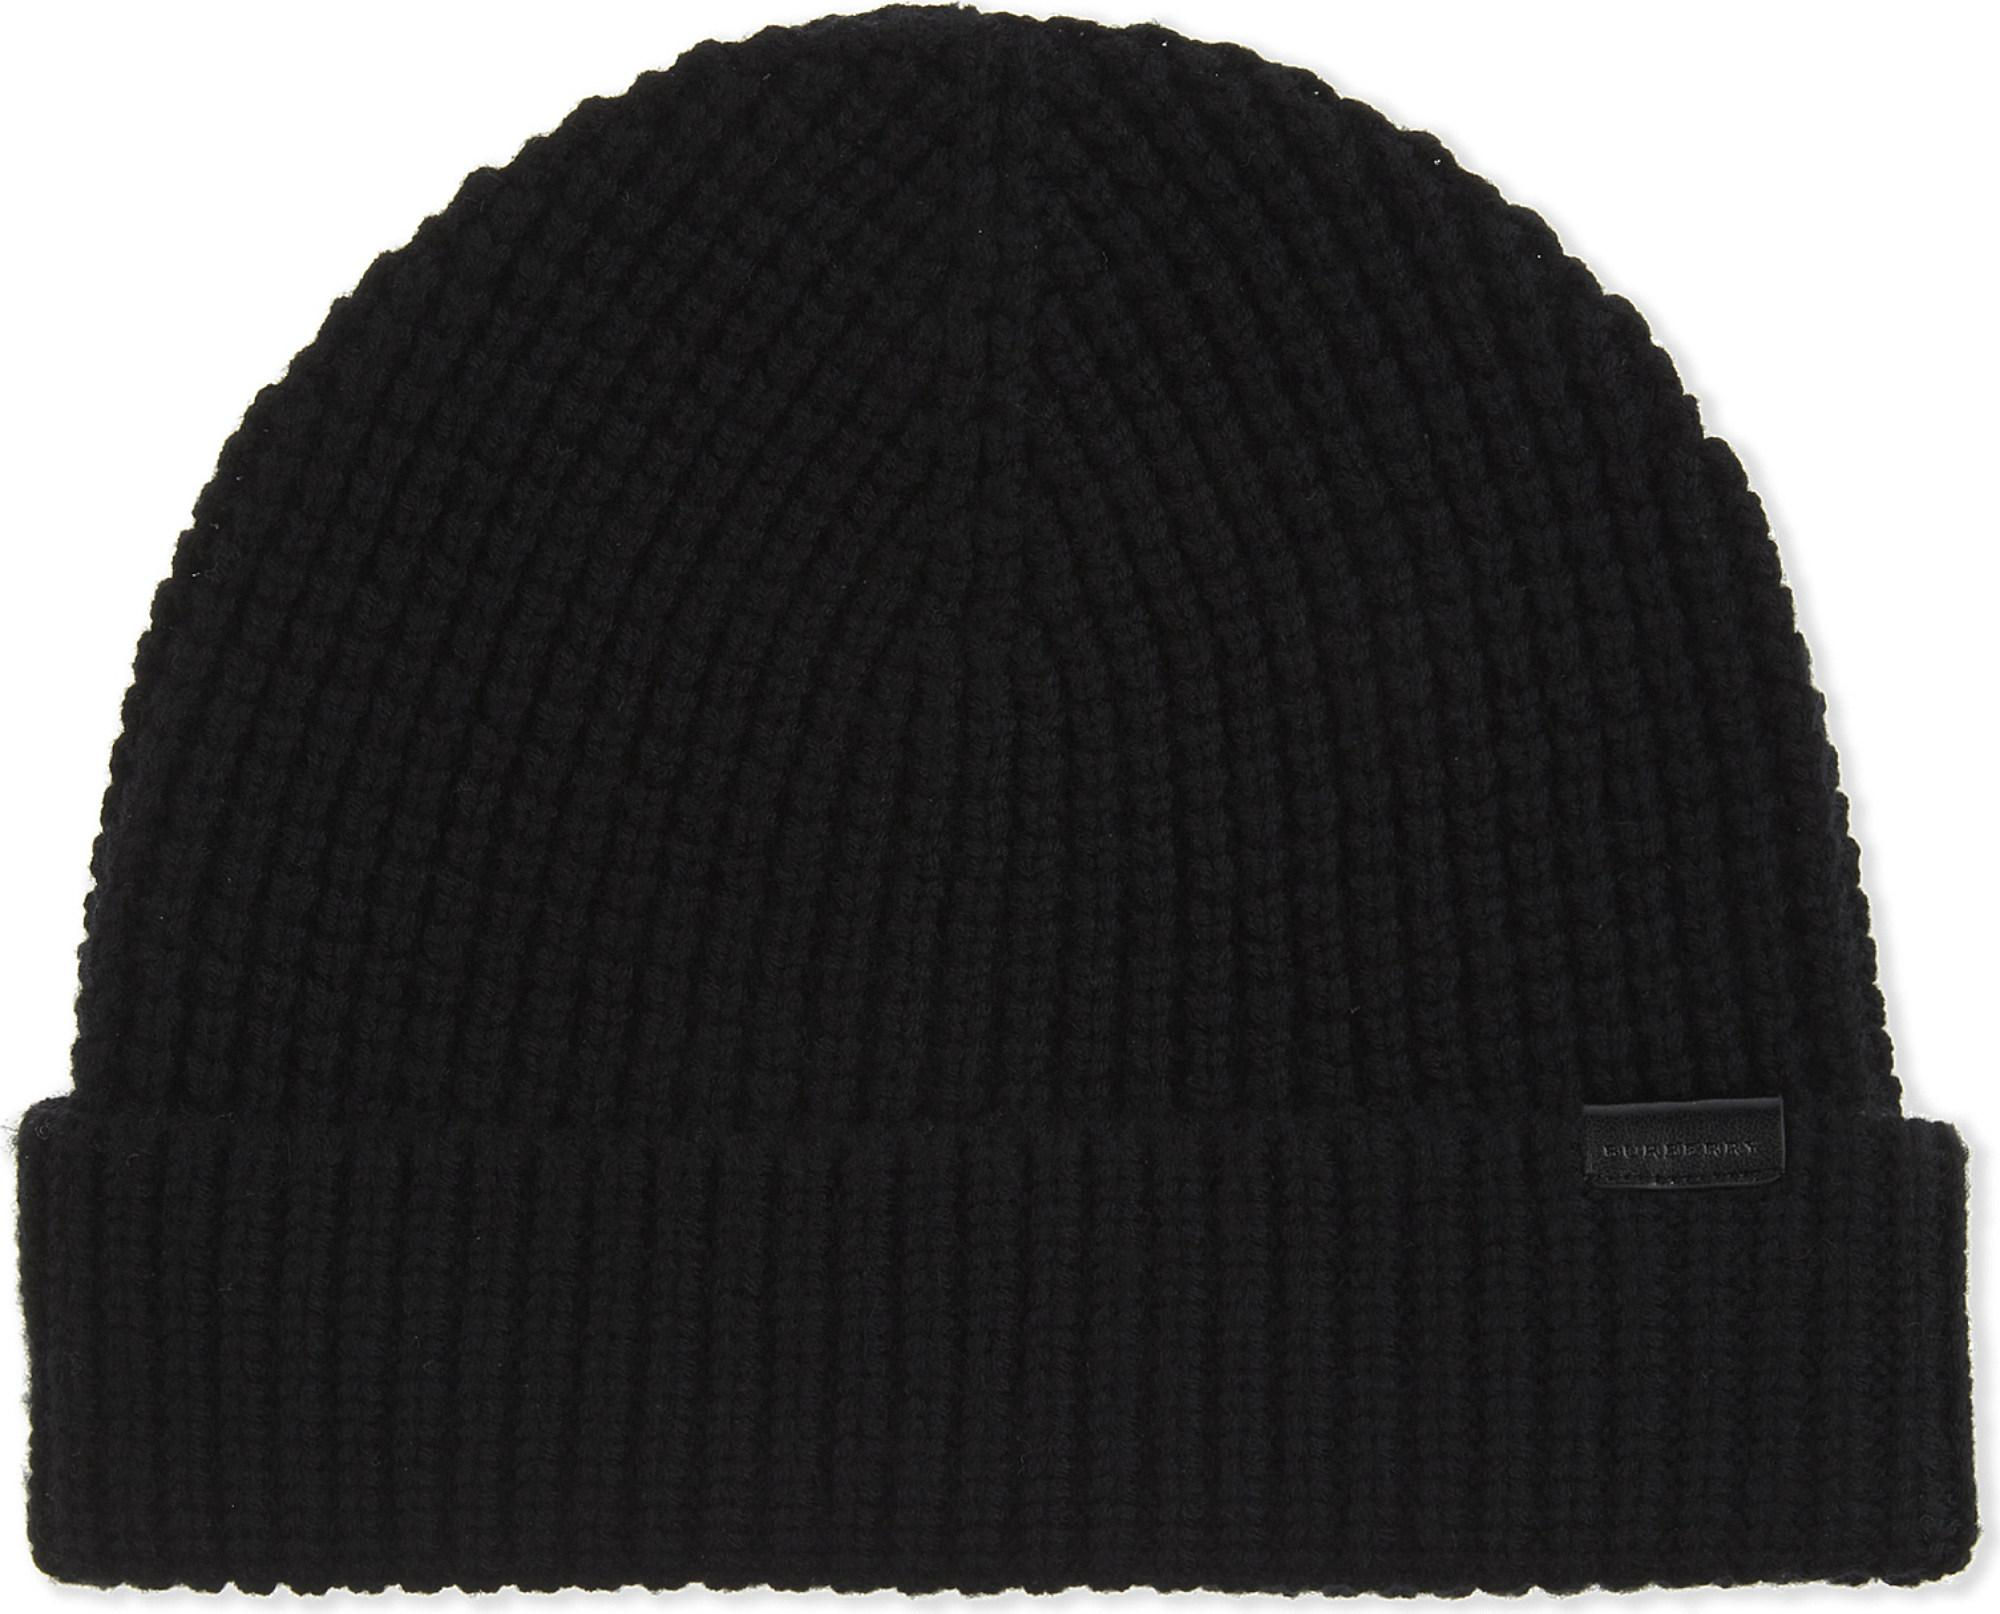 Burberry Wool Logo Tag Beanie Hat In Black For Men - Lyst encequiconcerne Burberry Beanie